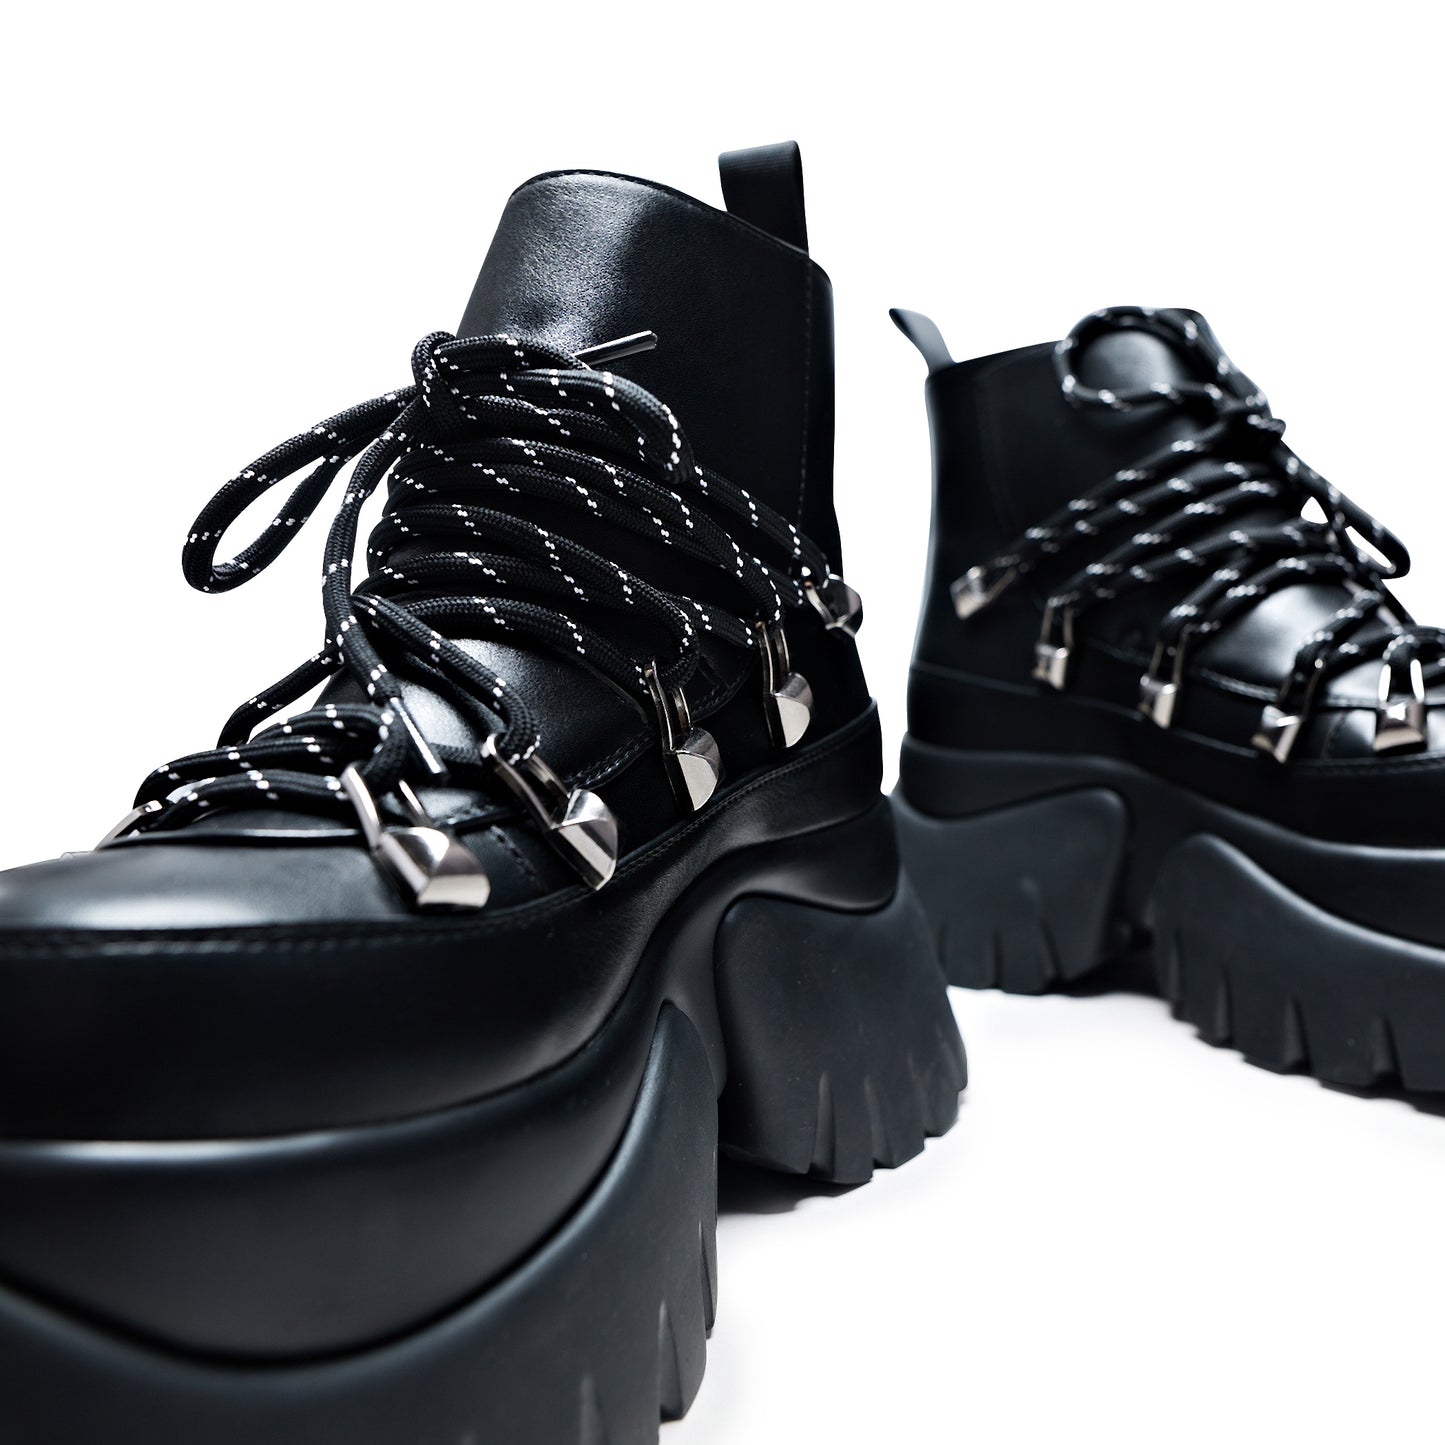 Sigmar Chunky Hiking Boots - Ankle Boots - KOI Footwear - Black - Front Detail View